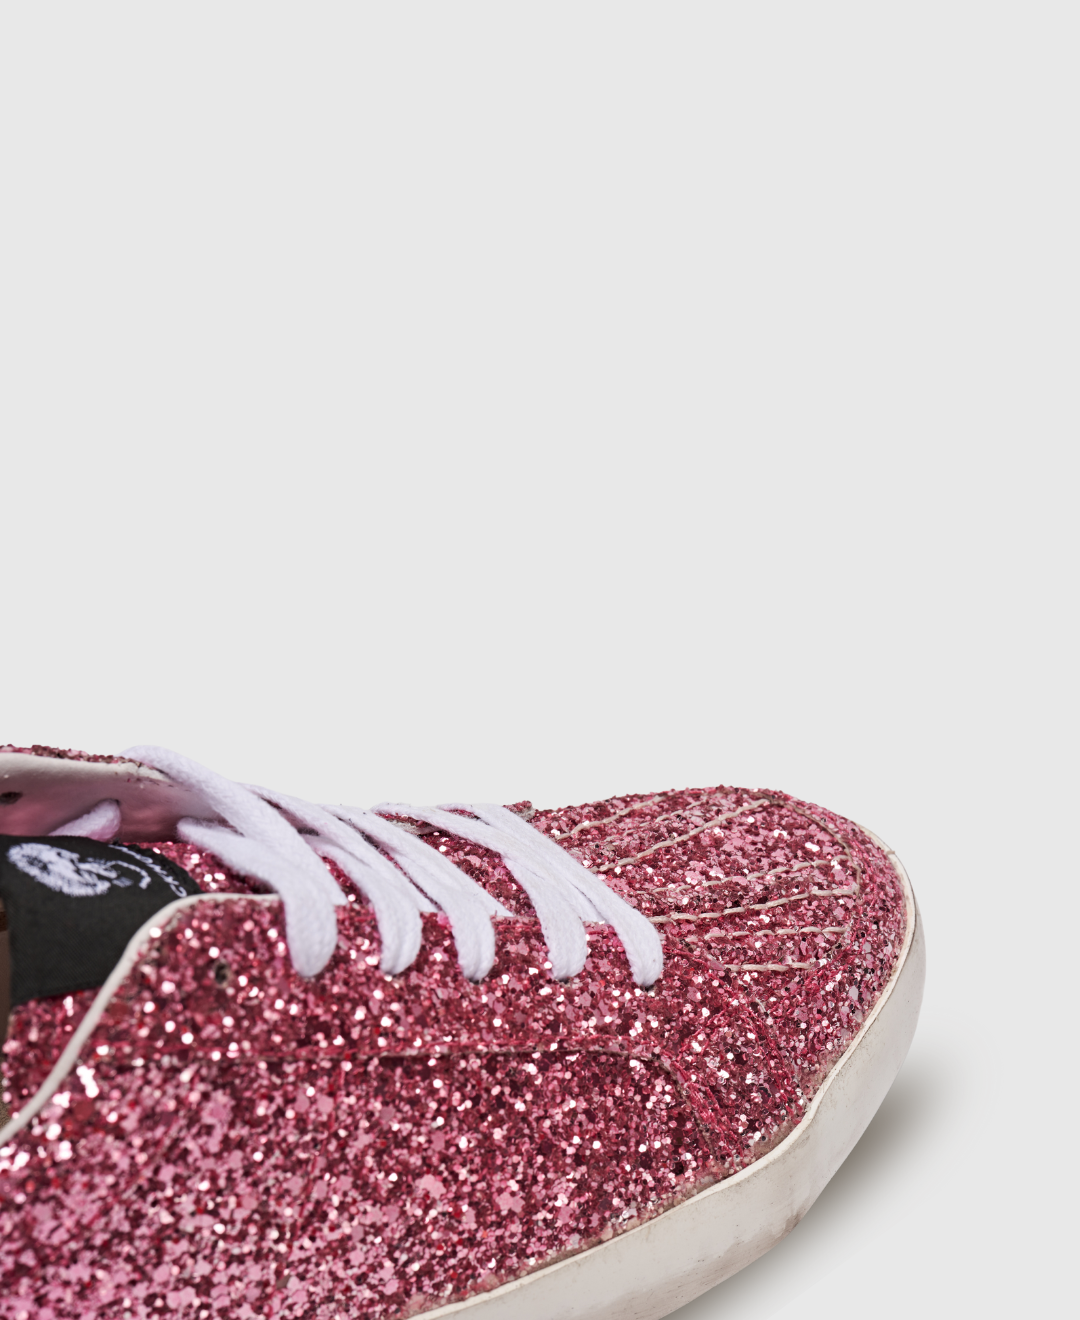 Lagos Low Sneakers in Calfskin with Glitter